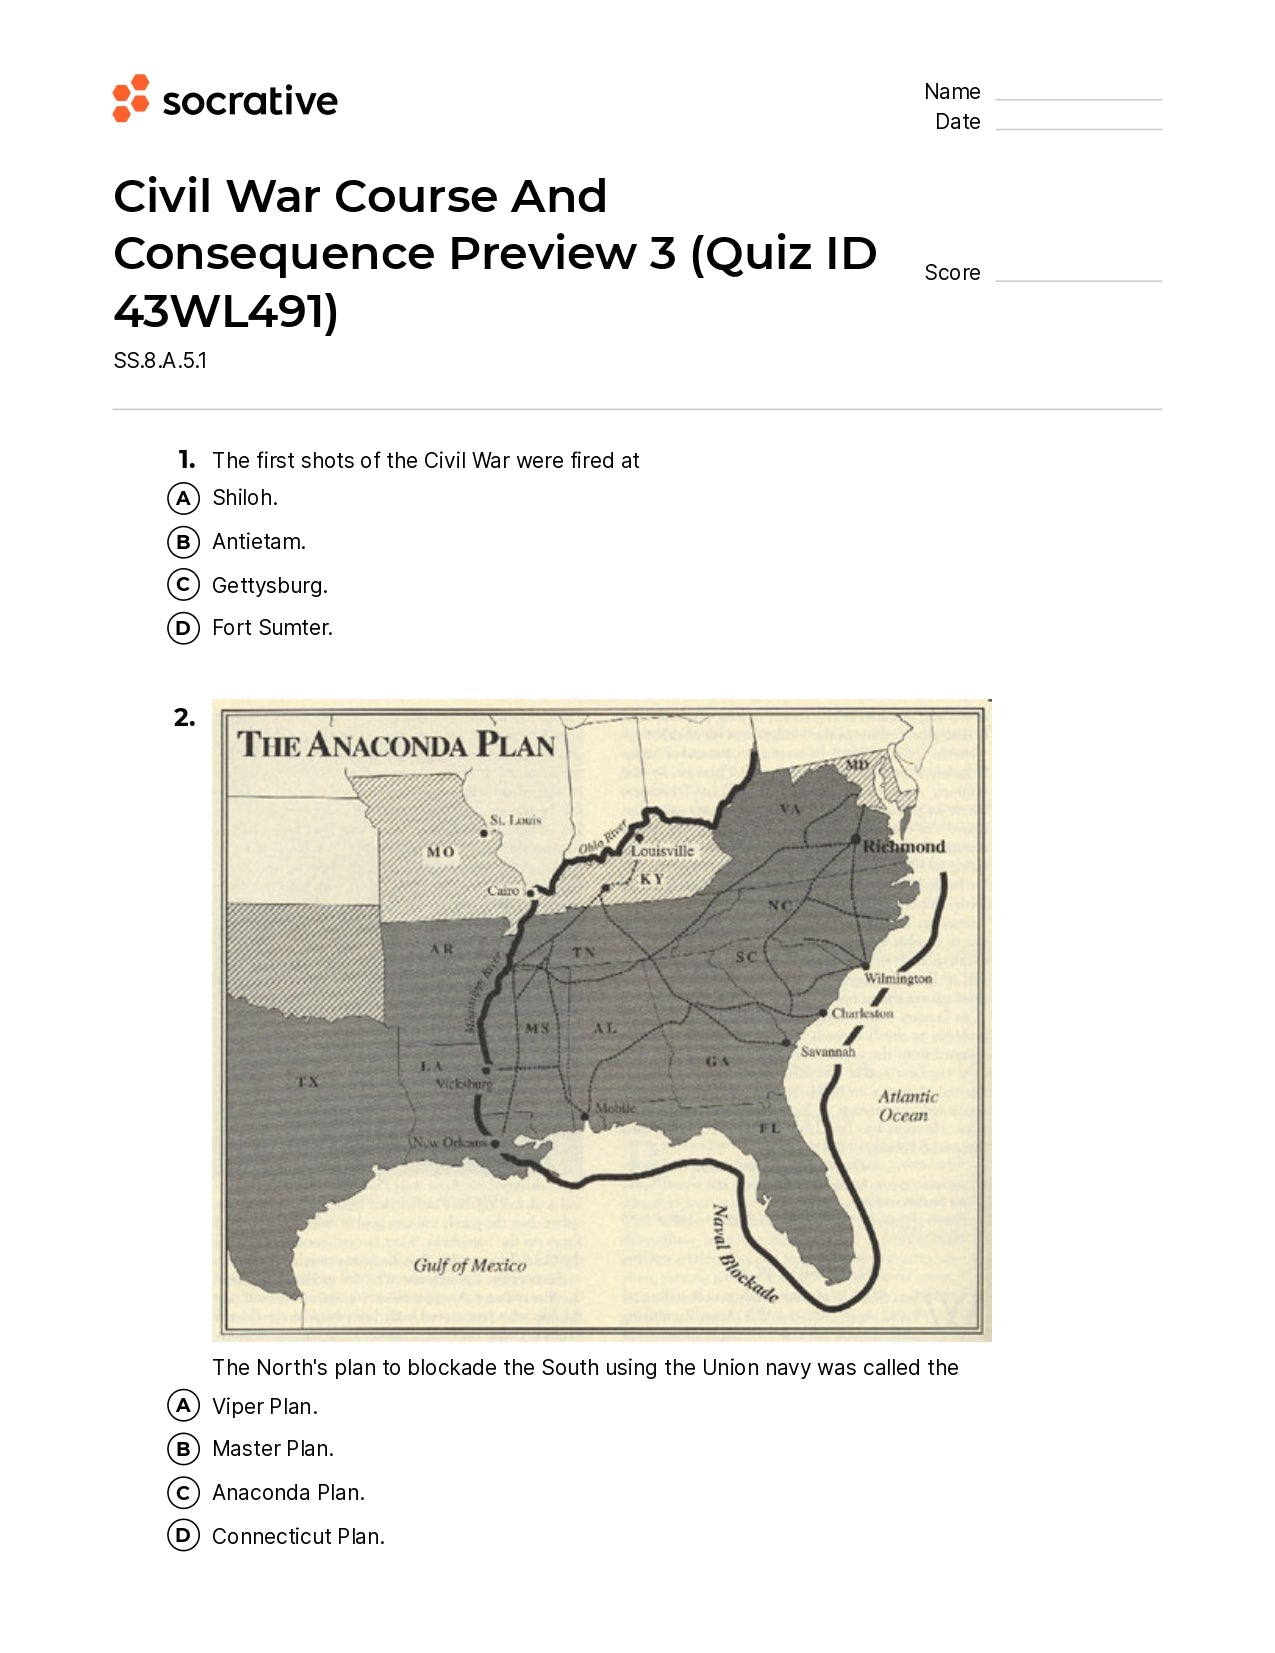 Civil War Course And Consequence Preview 3